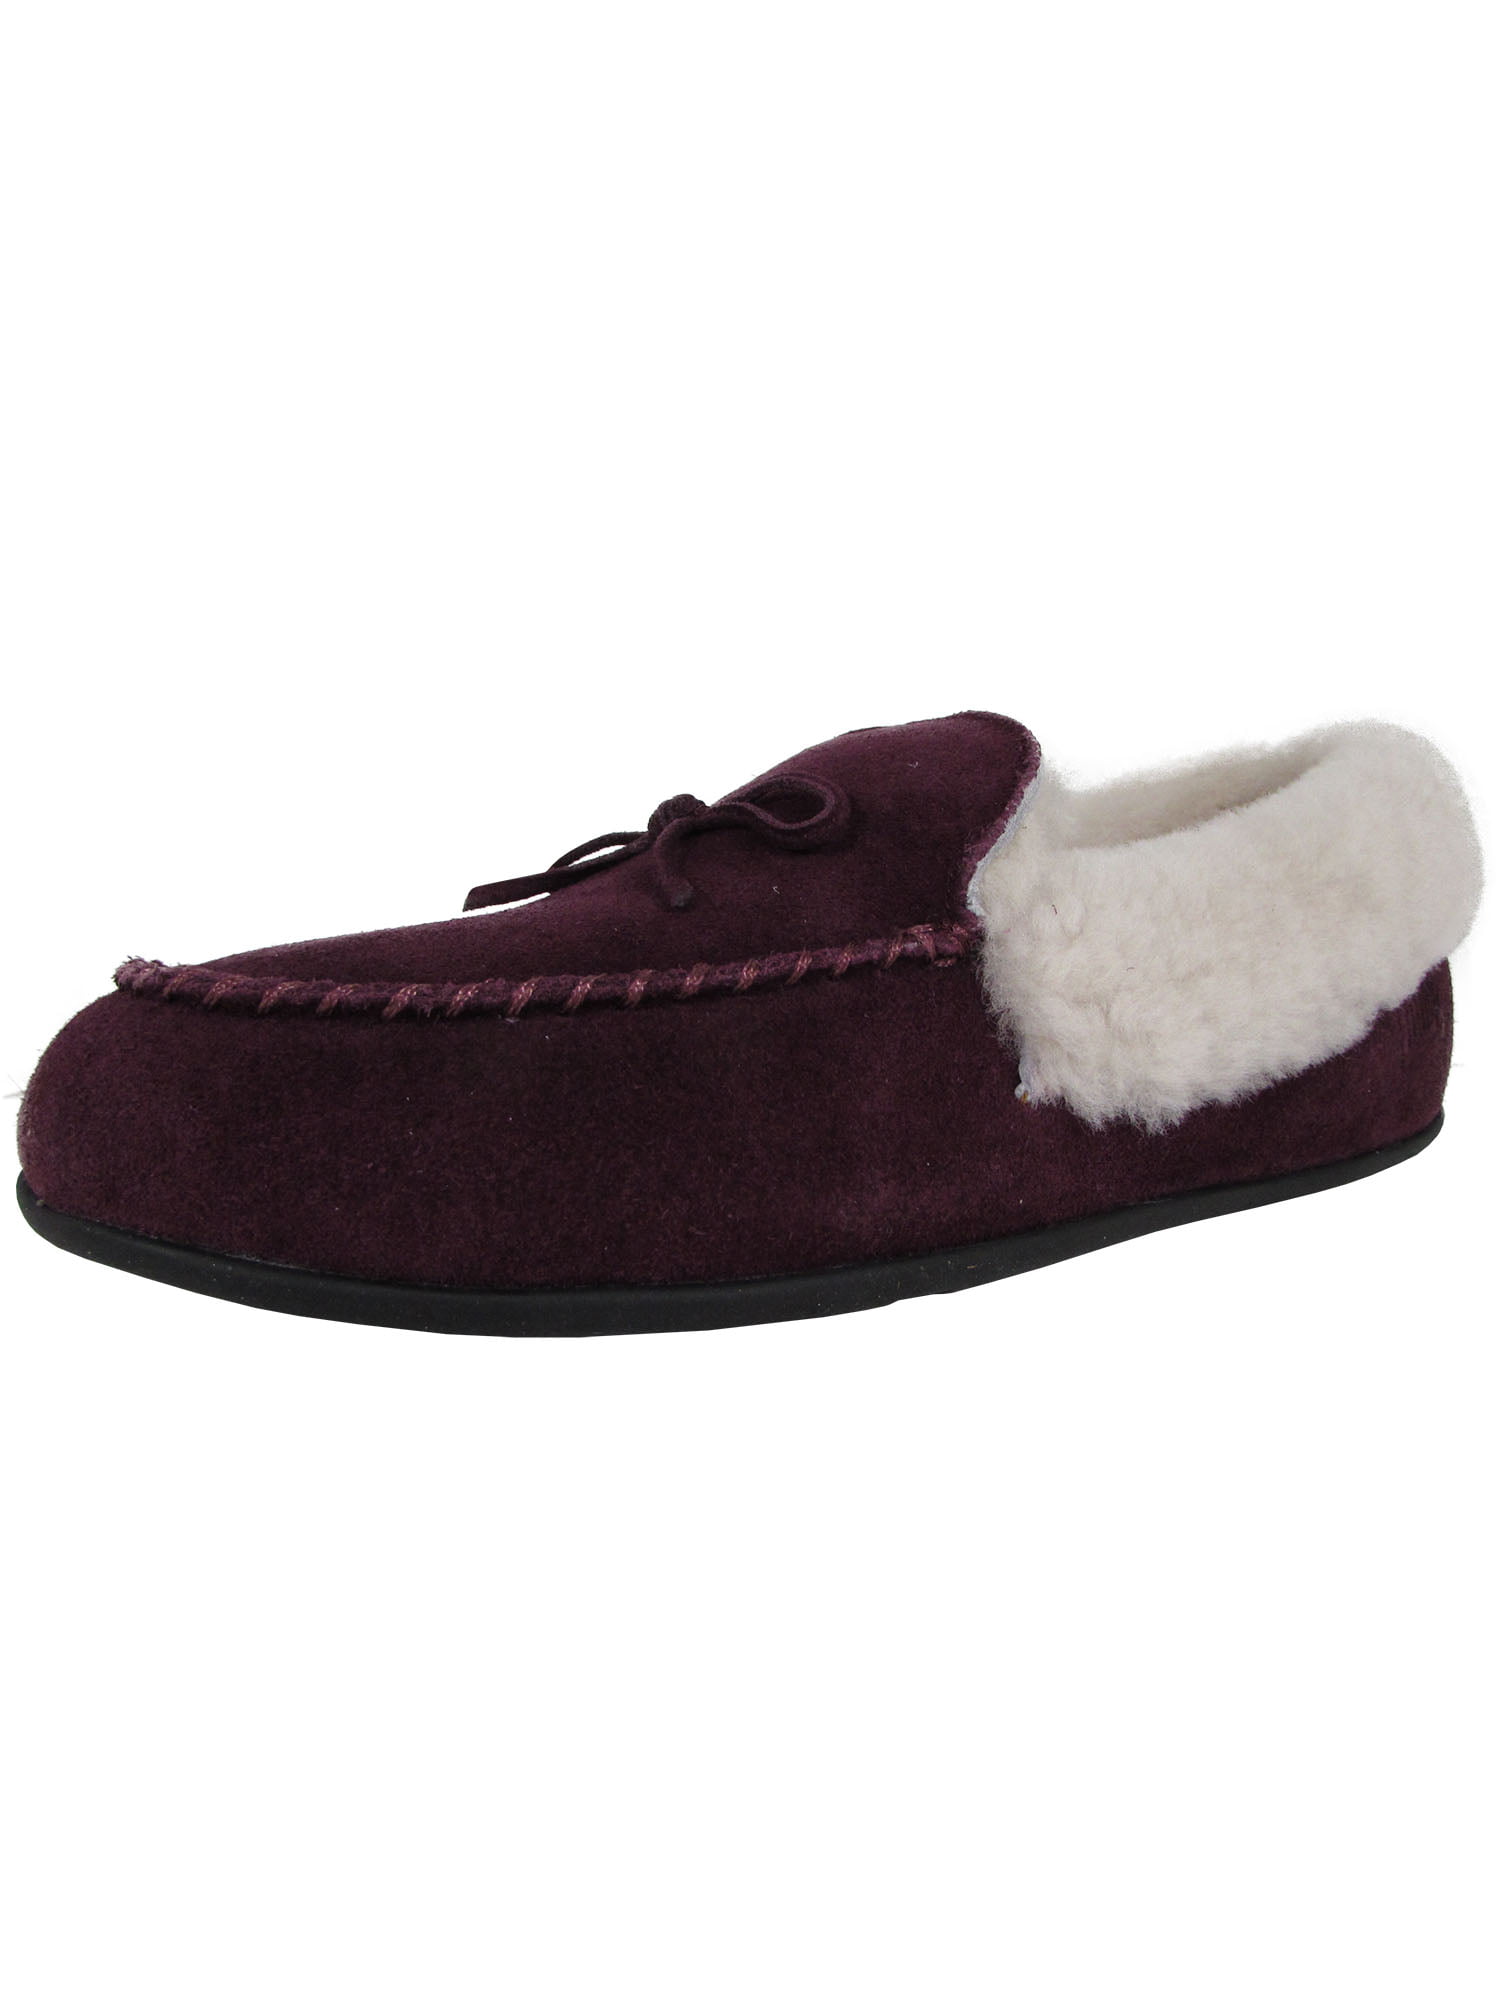 fitflop moccasins